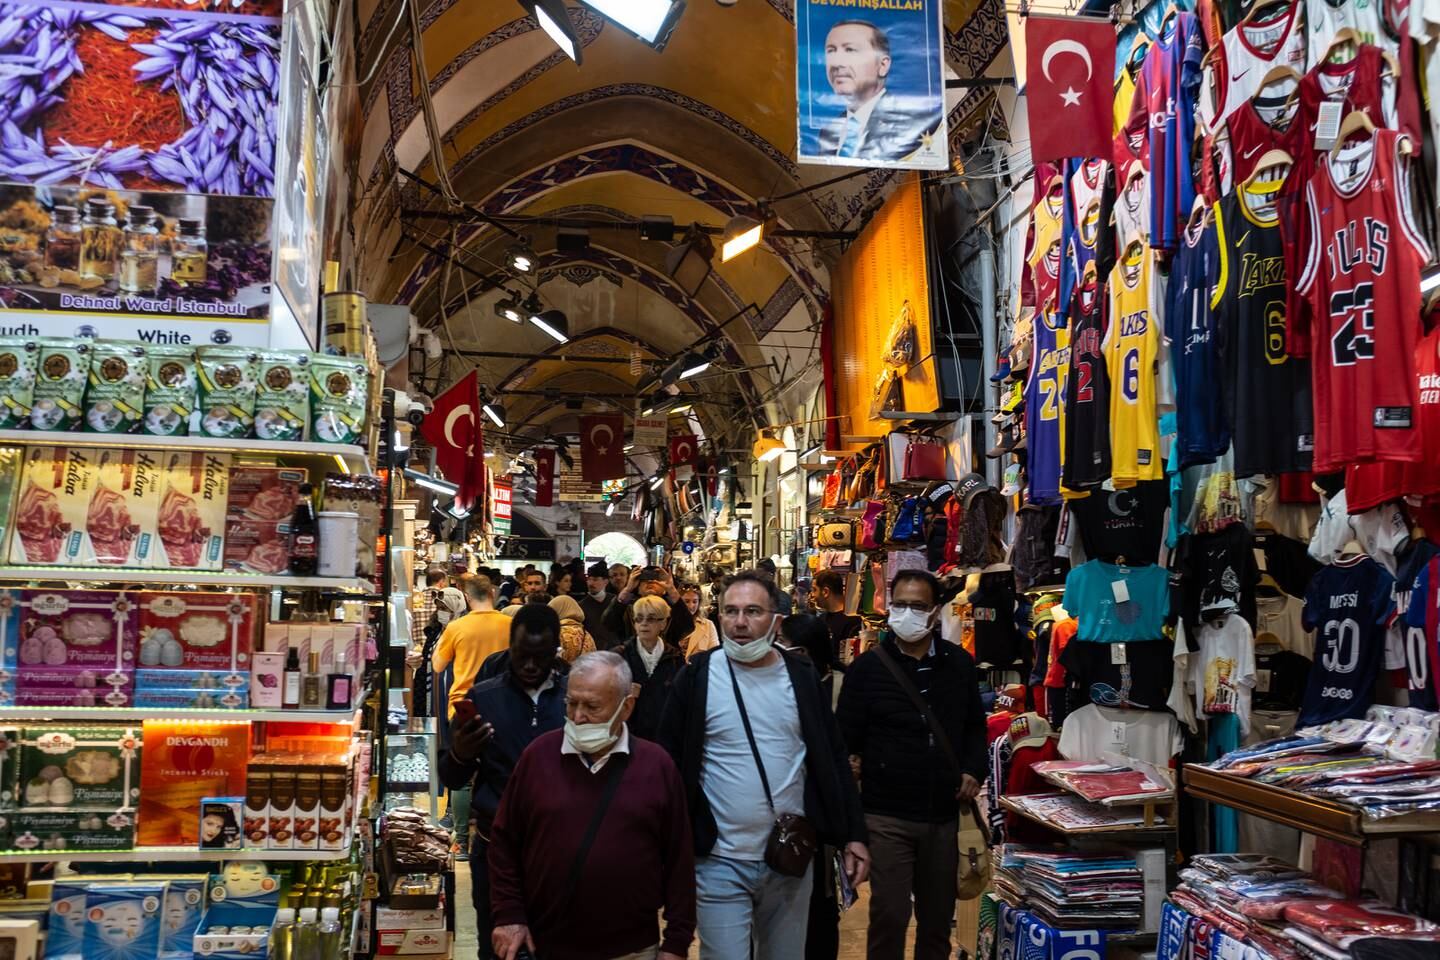 Visitors stroll through Istanbul's famous Grand Bazaar. Getty Images